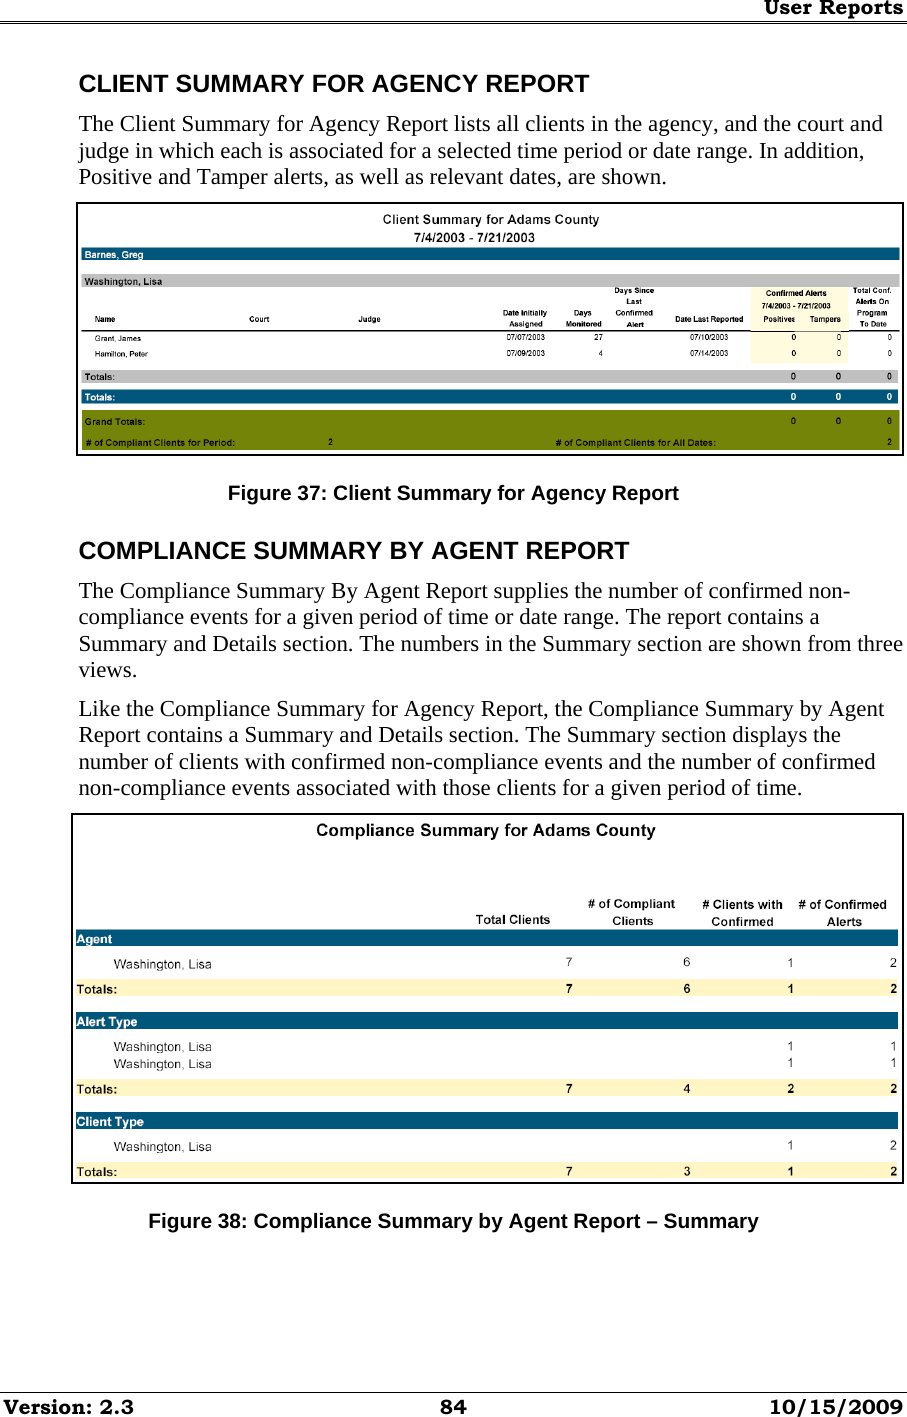 User Reports Version: 2.3  84  10/15/2009 CLIENT SUMMARY FOR AGENCY REPORT The Client Summary for Agency Report lists all clients in the agency, and the court and judge in which each is associated for a selected time period or date range. In addition, Positive and Tamper alerts, as well as relevant dates, are shown.  Figure 37: Client Summary for Agency Report COMPLIANCE SUMMARY BY AGENT REPORT The Compliance Summary By Agent Report supplies the number of confirmed non-compliance events for a given period of time or date range. The report contains a Summary and Details section. The numbers in the Summary section are shown from three views. Like the Compliance Summary for Agency Report, the Compliance Summary by Agent Report contains a Summary and Details section. The Summary section displays the number of clients with confirmed non-compliance events and the number of confirmed non-compliance events associated with those clients for a given period of time.  Figure 38: Compliance Summary by Agent Report – Summary 